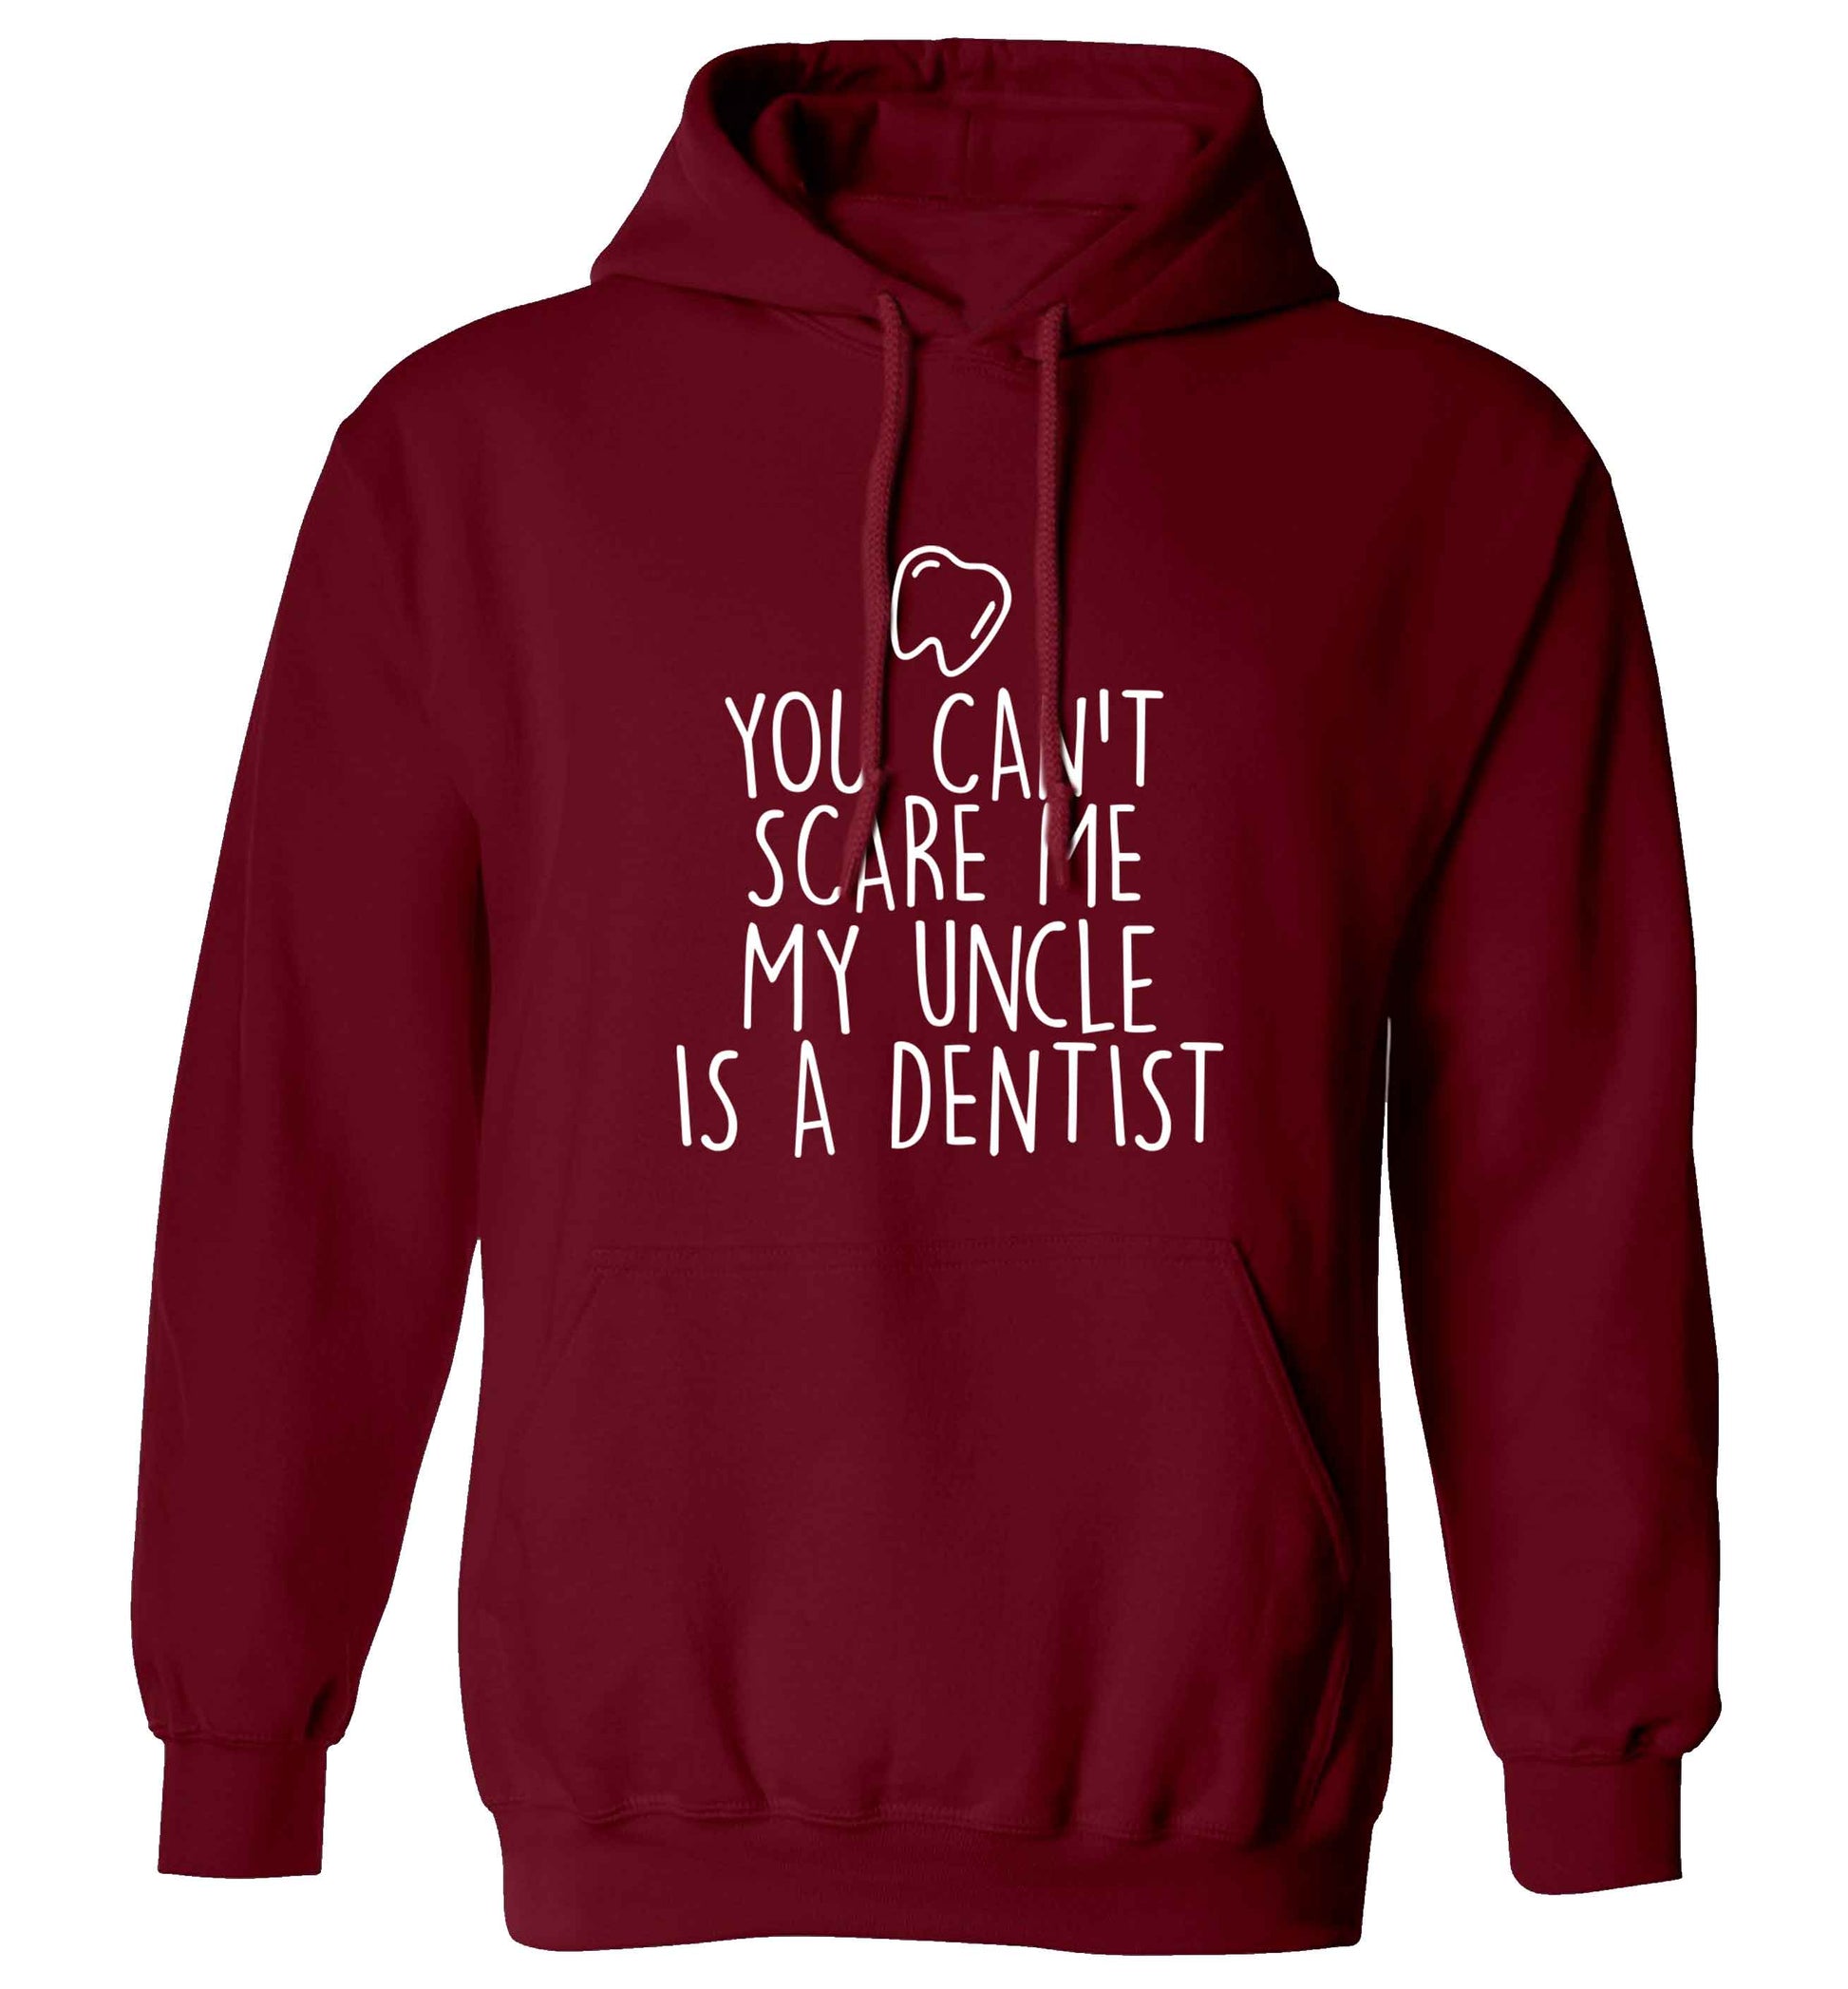 You can't scare me my uncle is a dentist adults unisex maroon hoodie 2XL